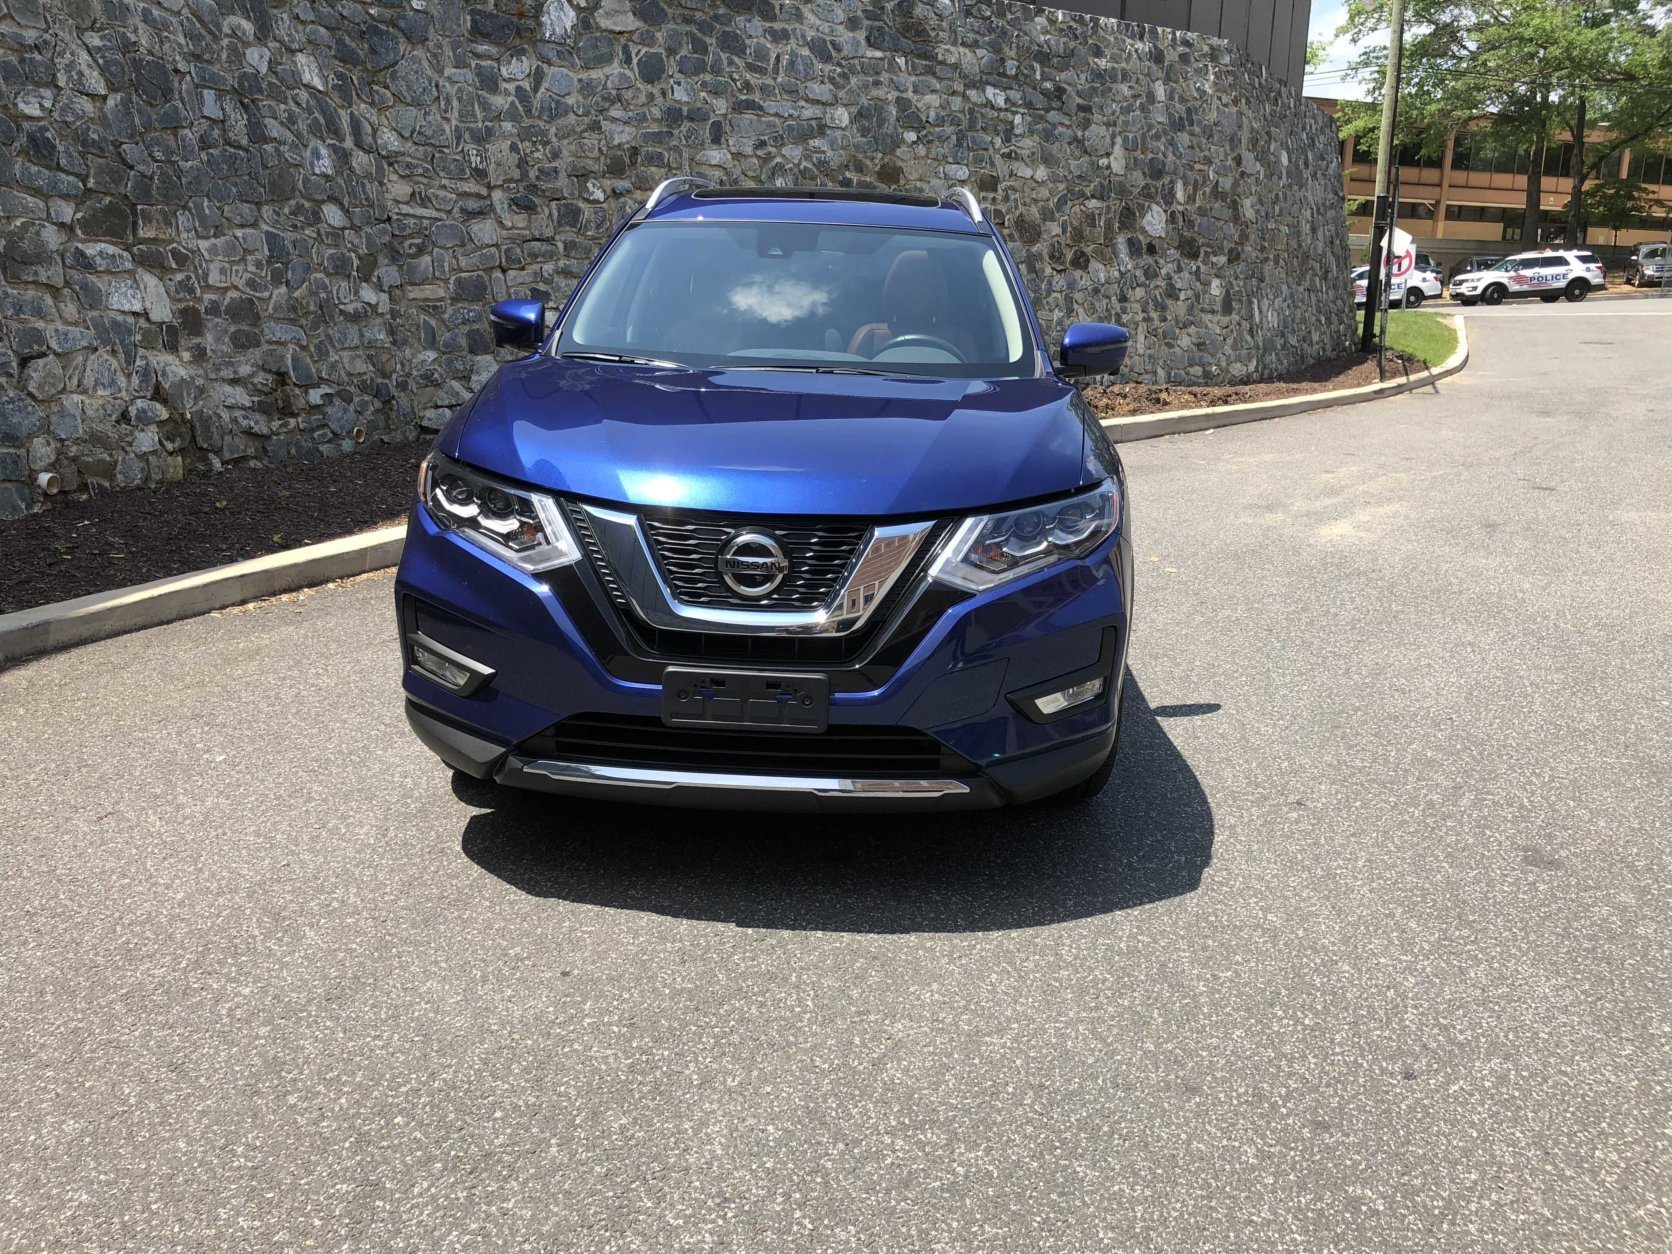 The Caspian Blue is a great color on this Nissan: It looks rich. (WTOP/Mike Parris)